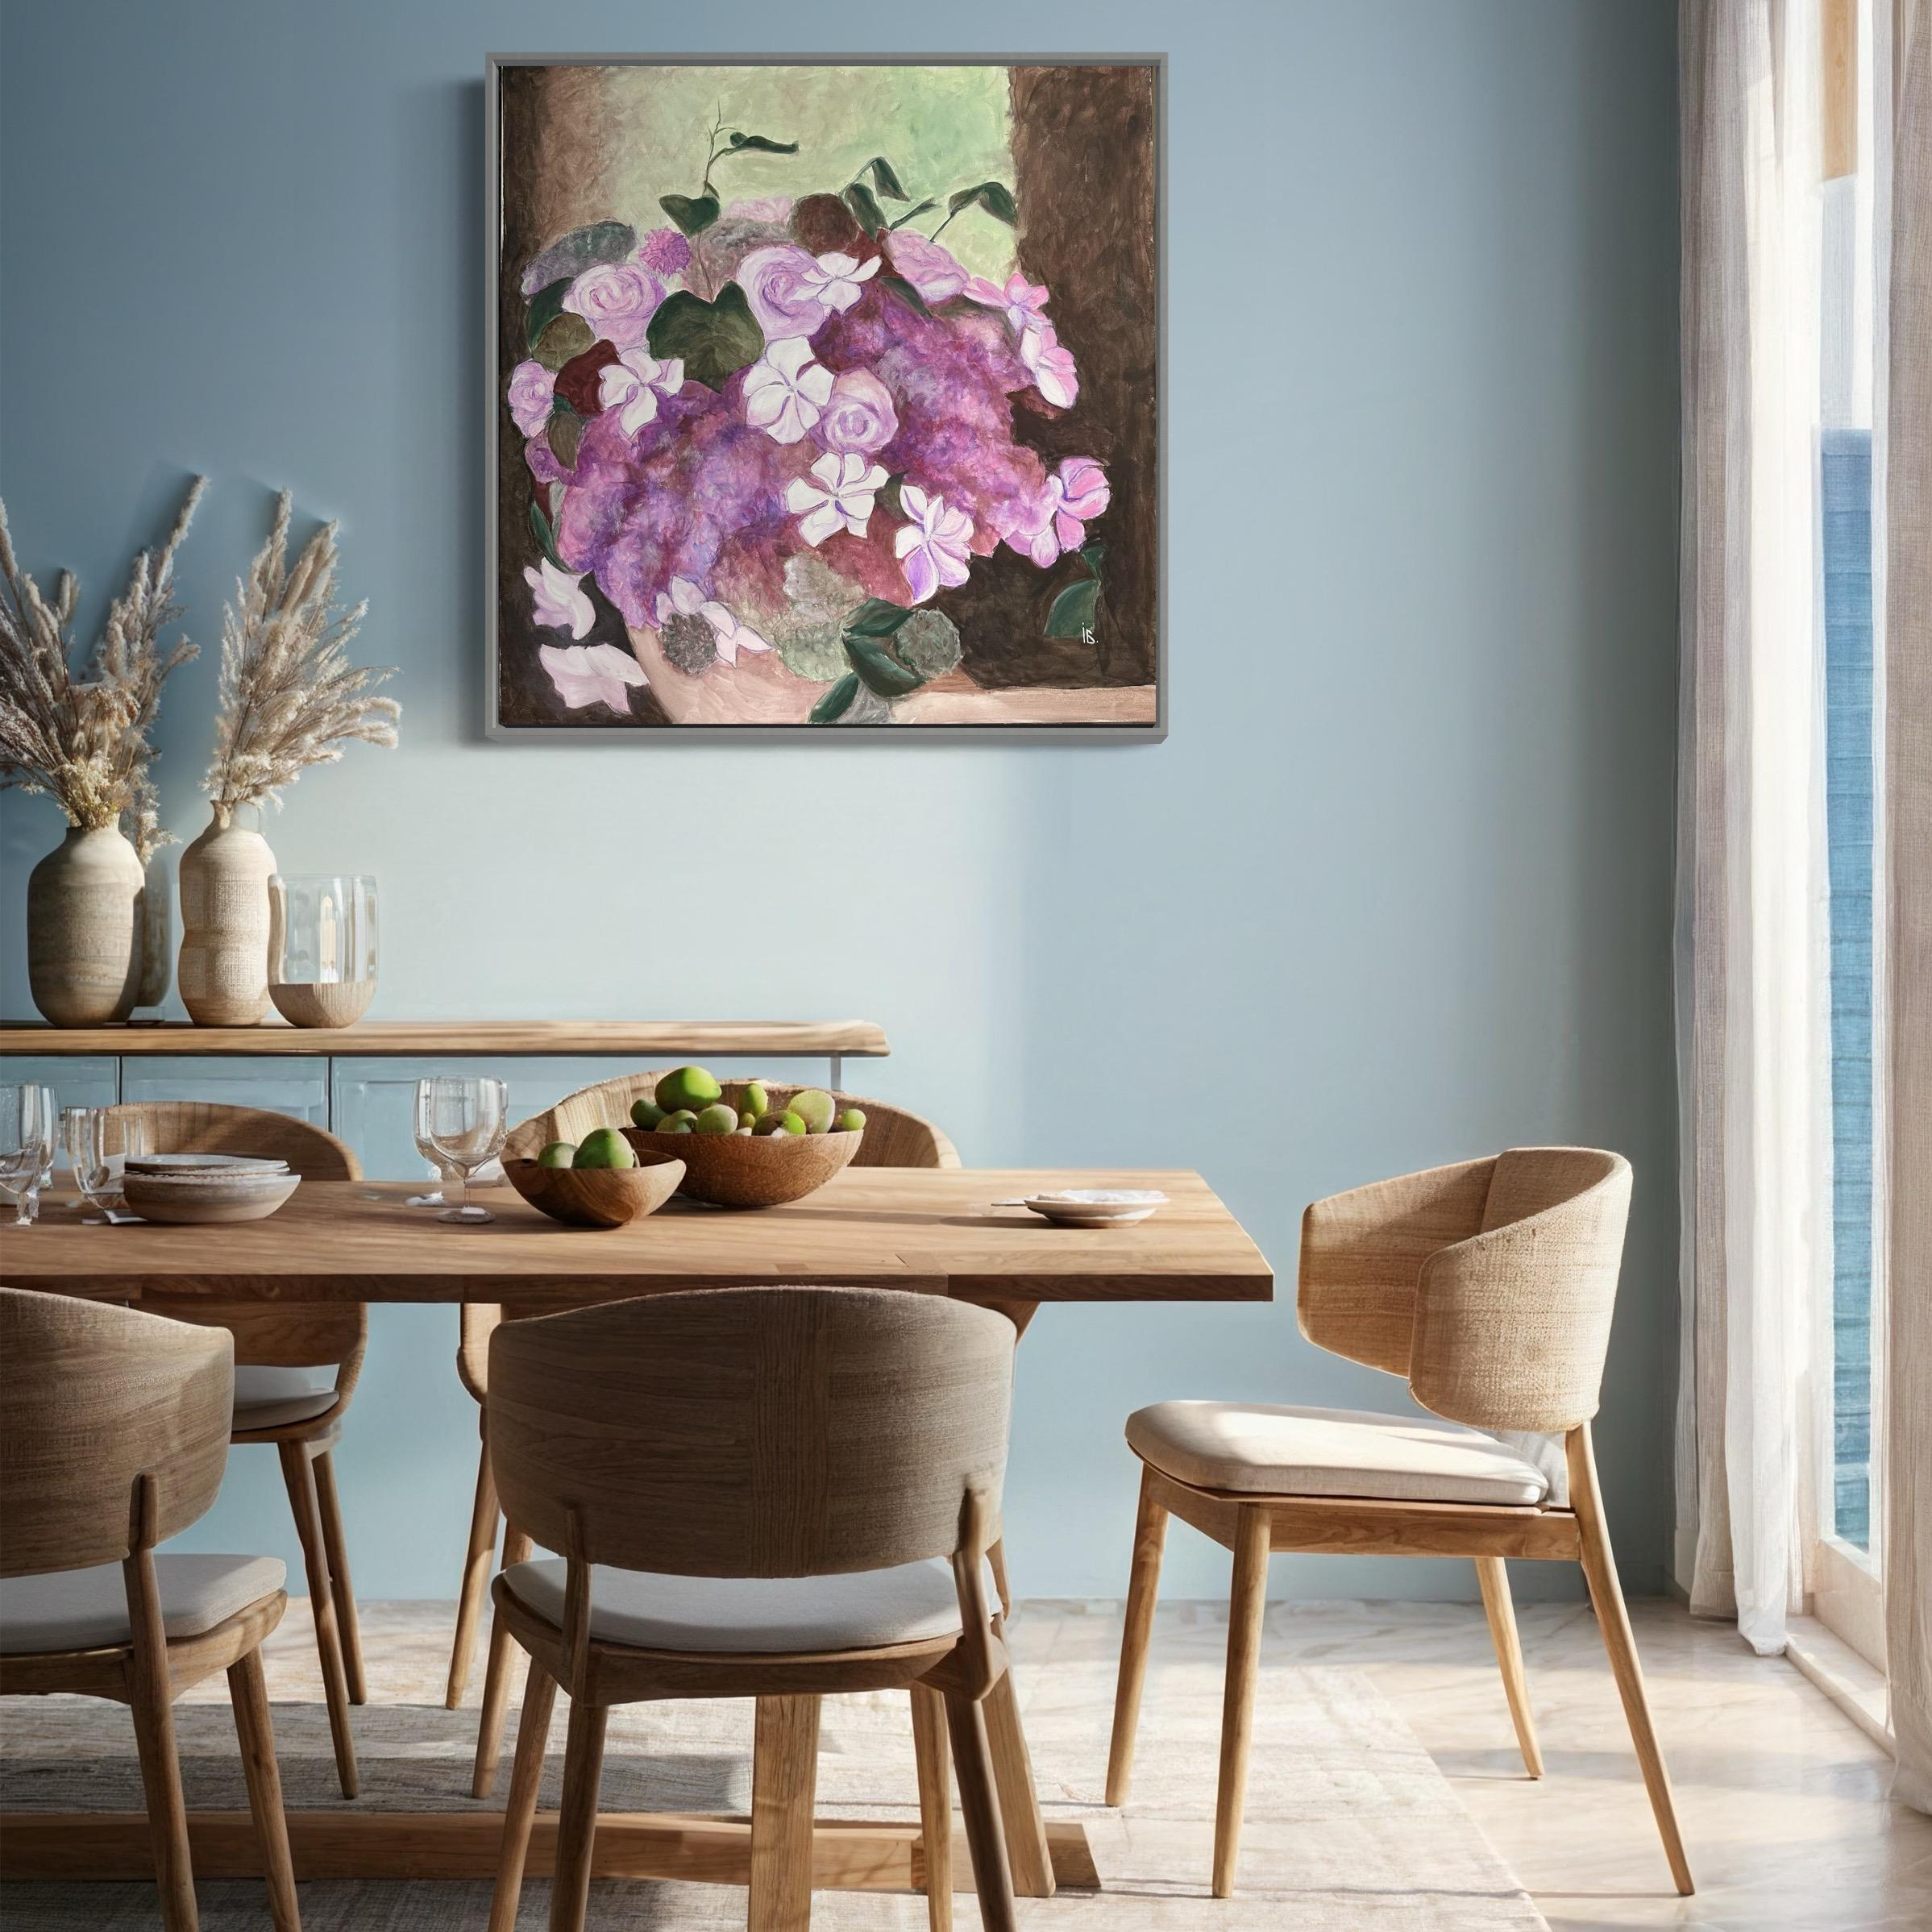 
This painting offers a tapestry of floral splendor, a gentle cascade of blooms that reveals a delicate interplay of color and texture. The subtle tonal shifts from deep purples to tender pinks and the creaminess of whites create a lush, romantic